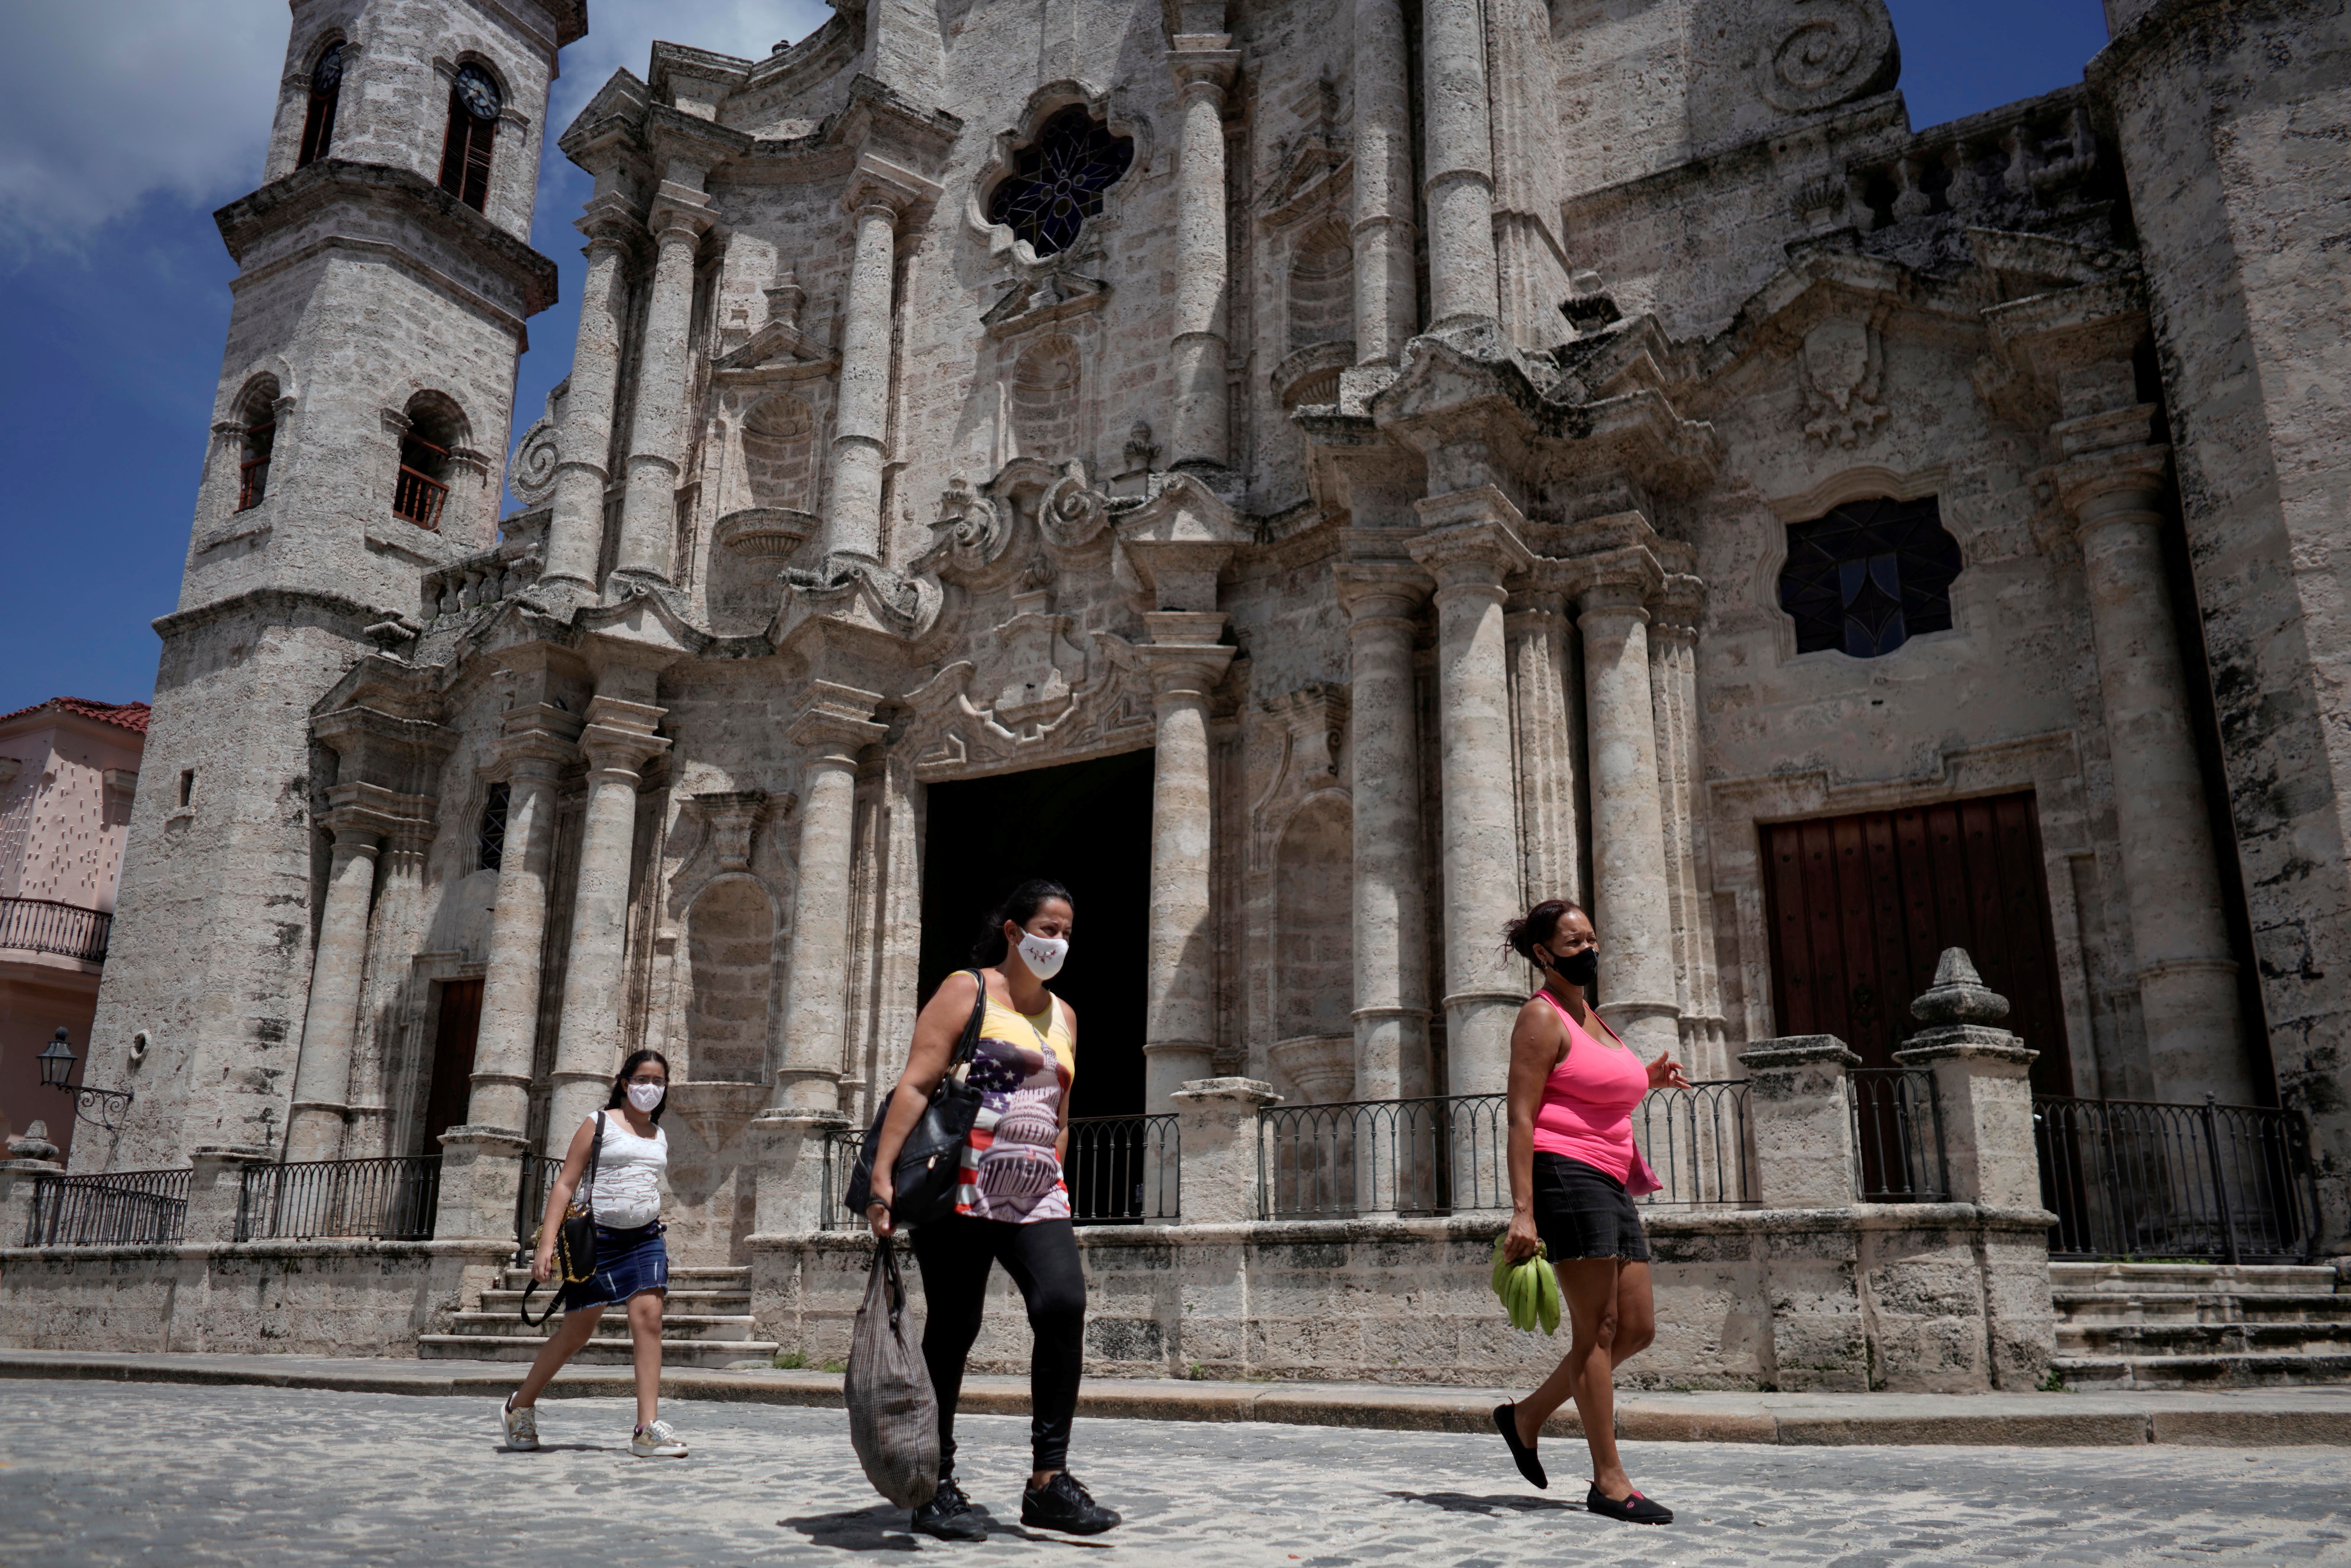 People pass by in front of the Havana's Cathedral